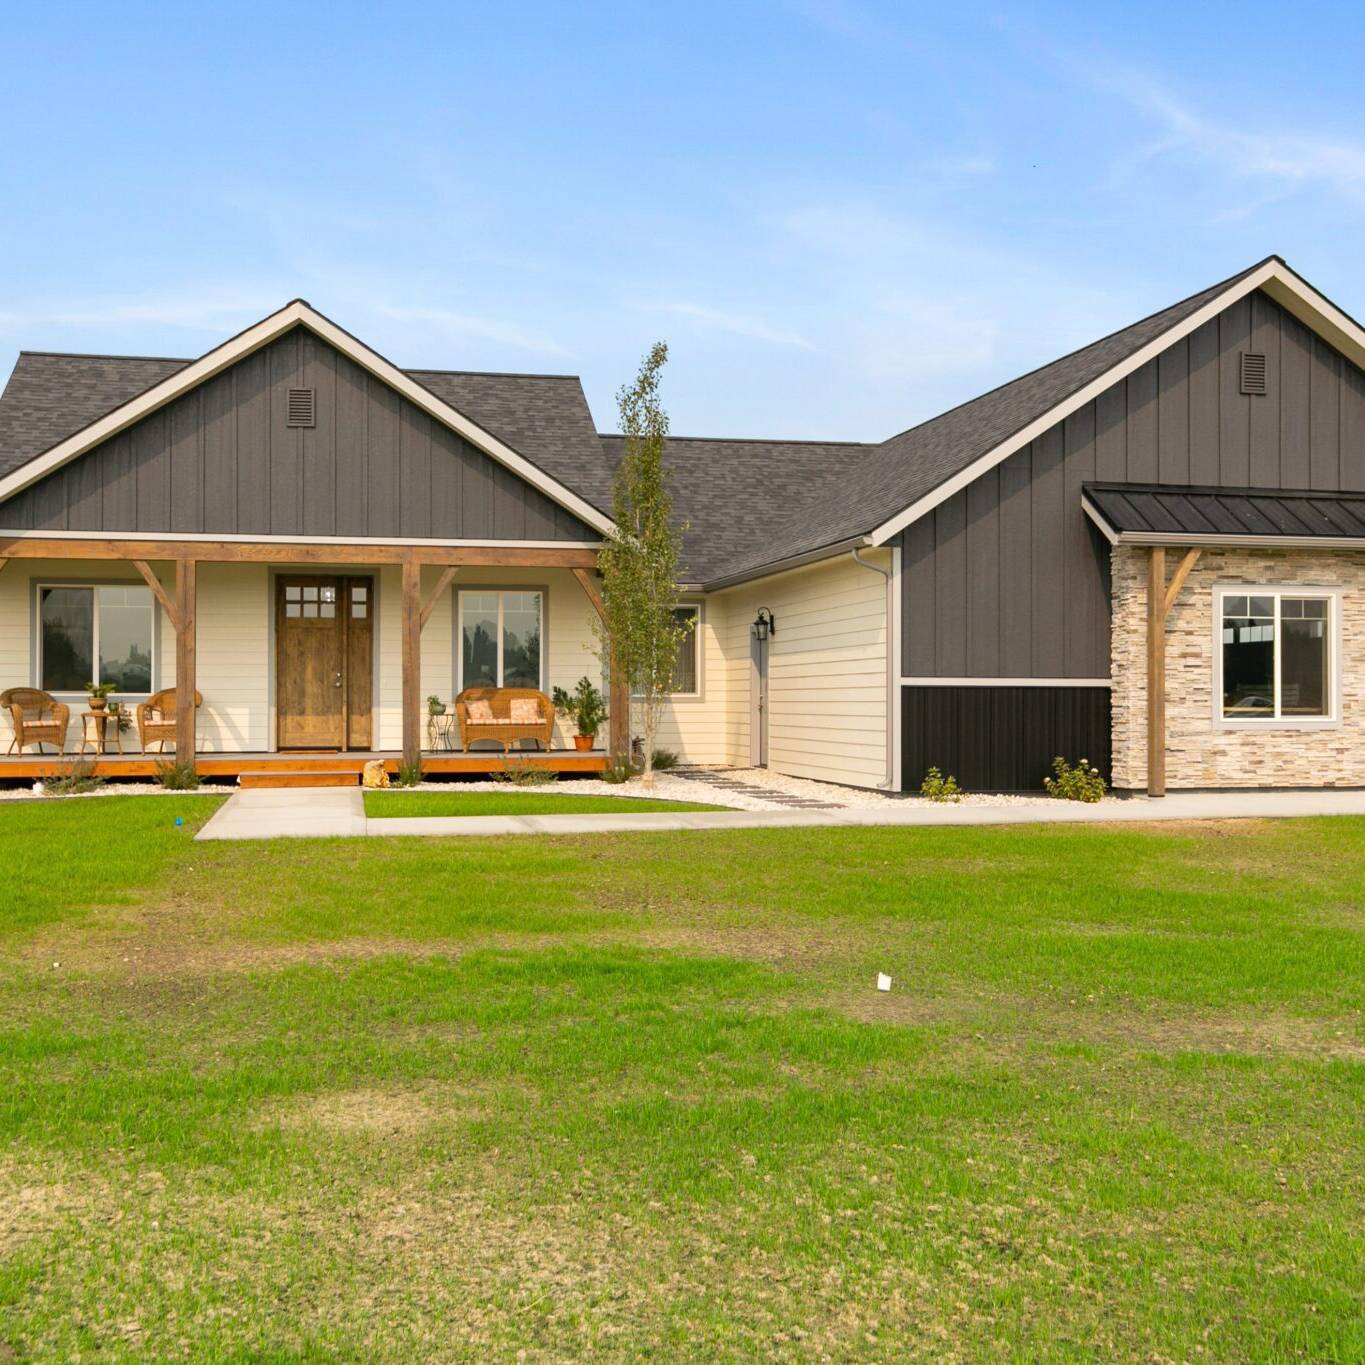 Front exterior of The Seeley model home - Built by Big Sky Builder in Hamilton, MT